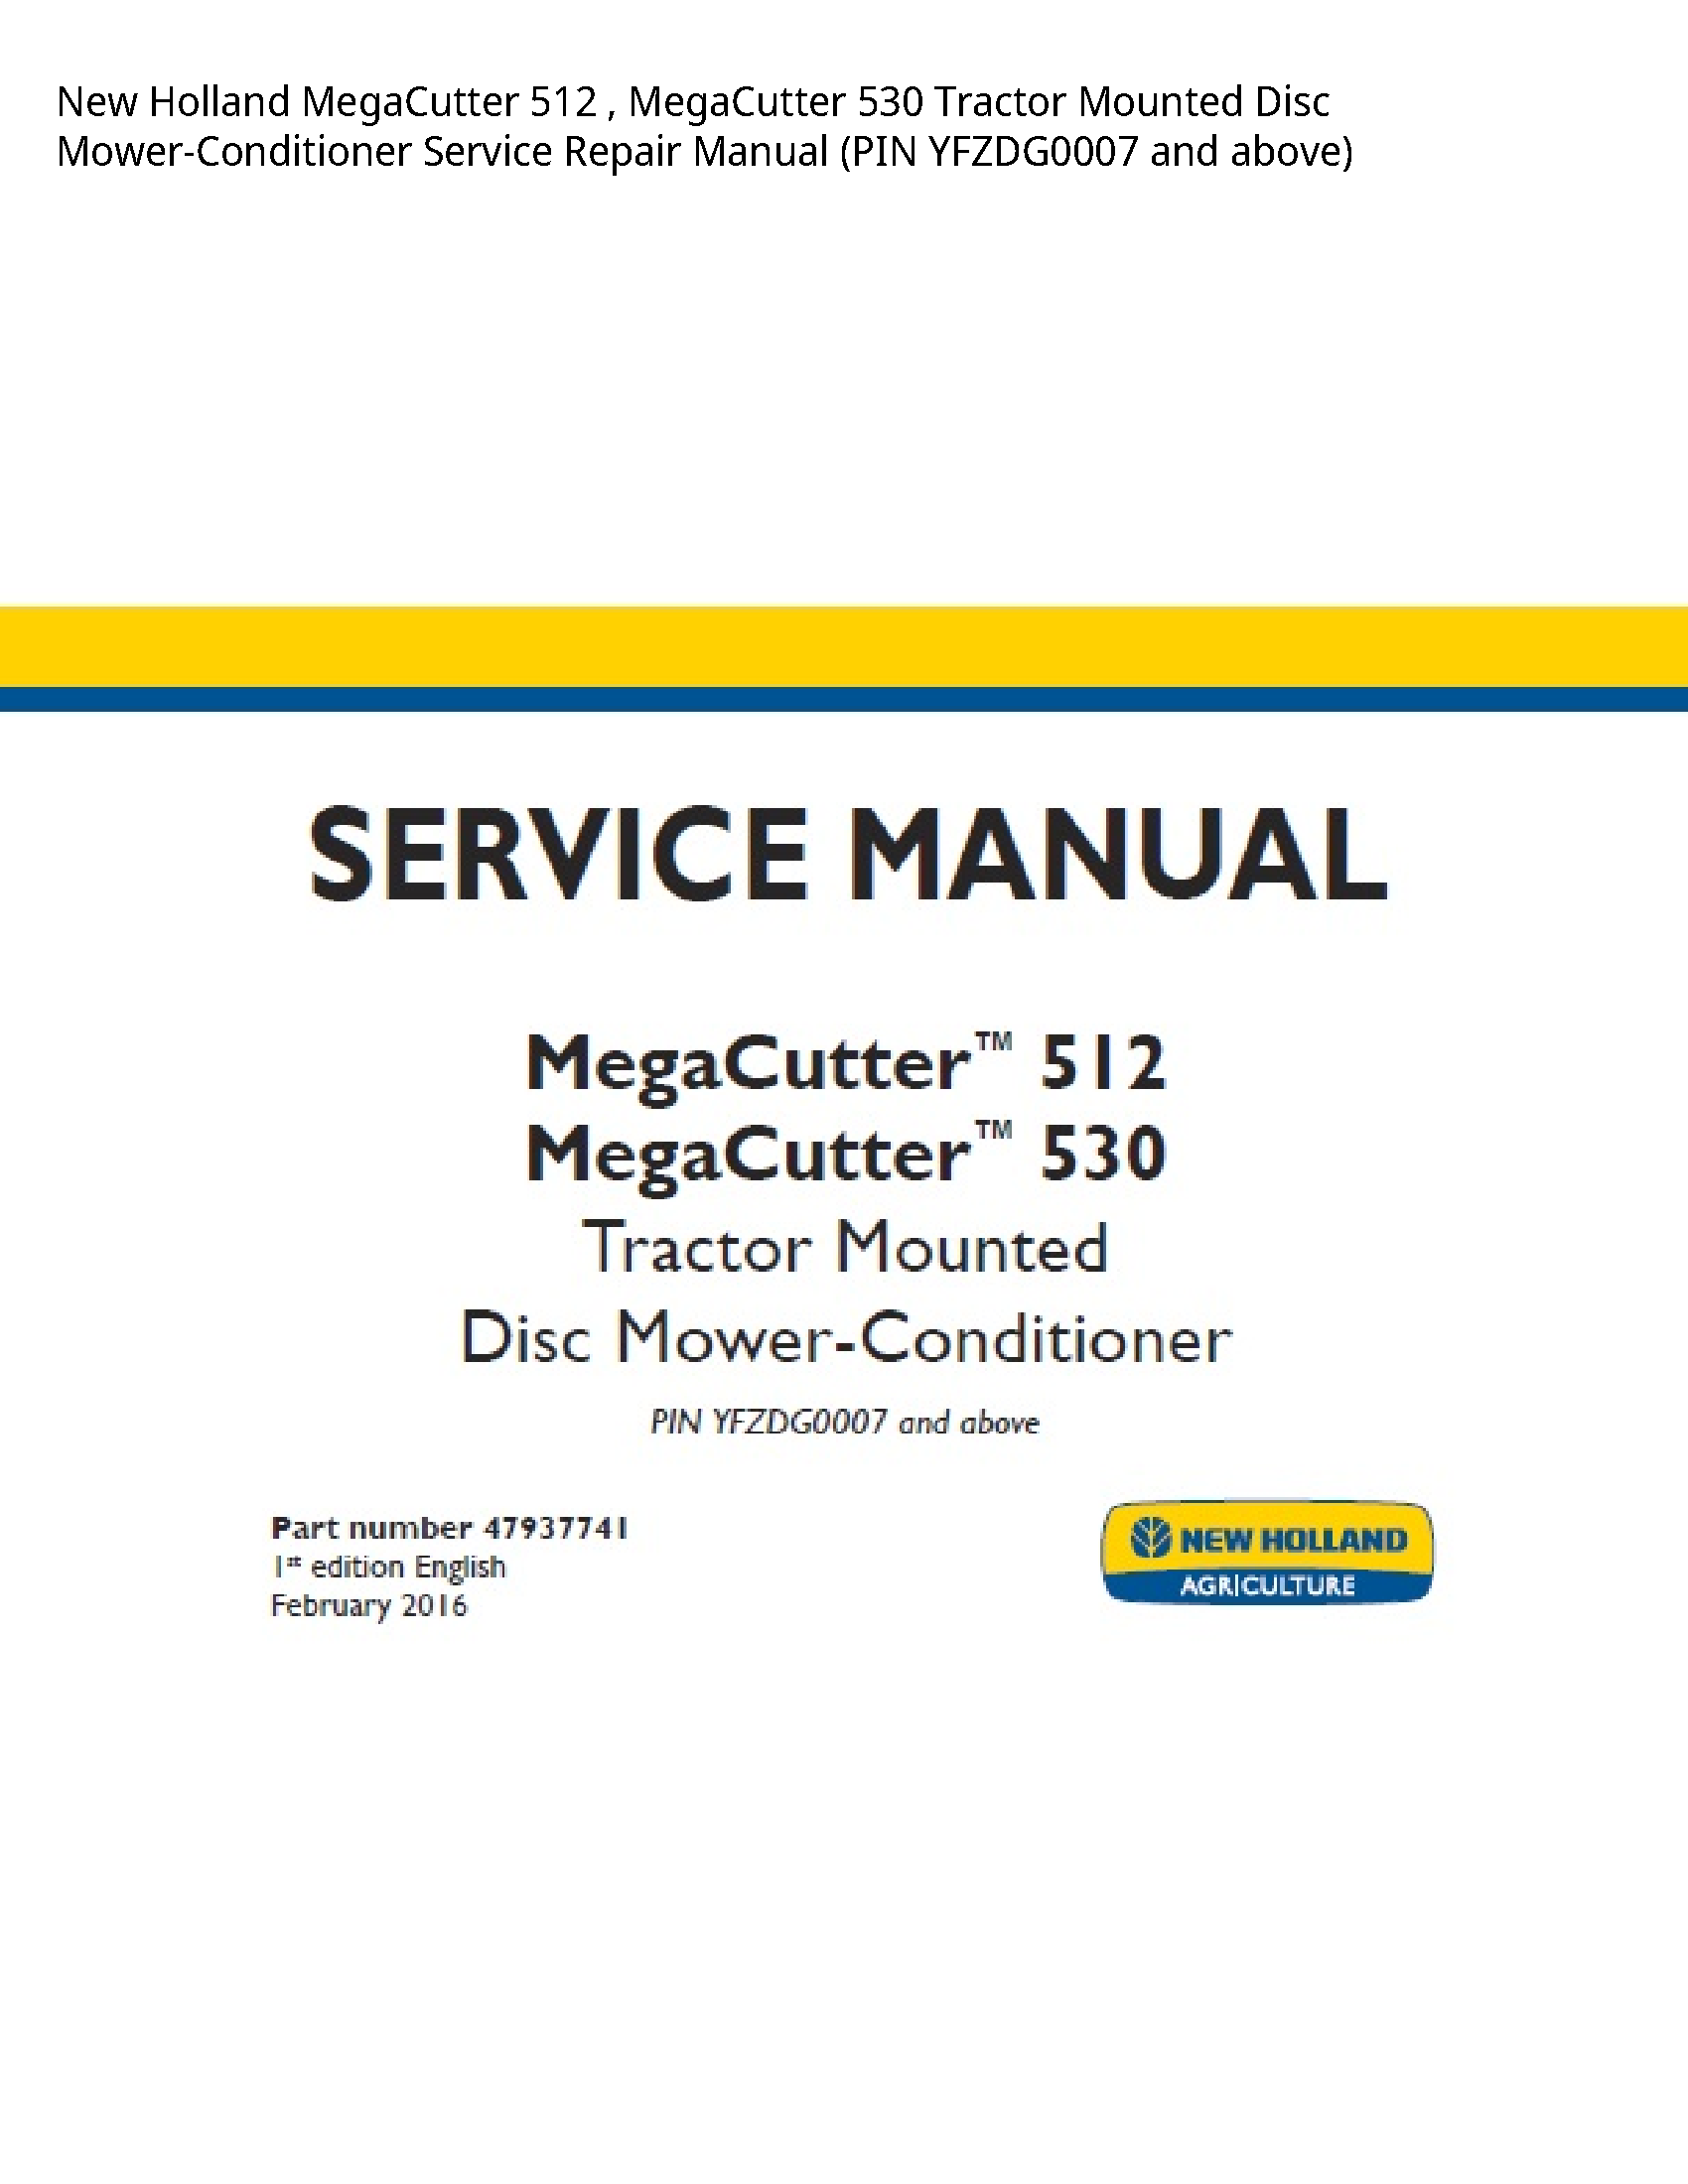 New Holland 512 MegaCutter MegaCutter Tractor Mounted Disc Mower-Conditioner manual